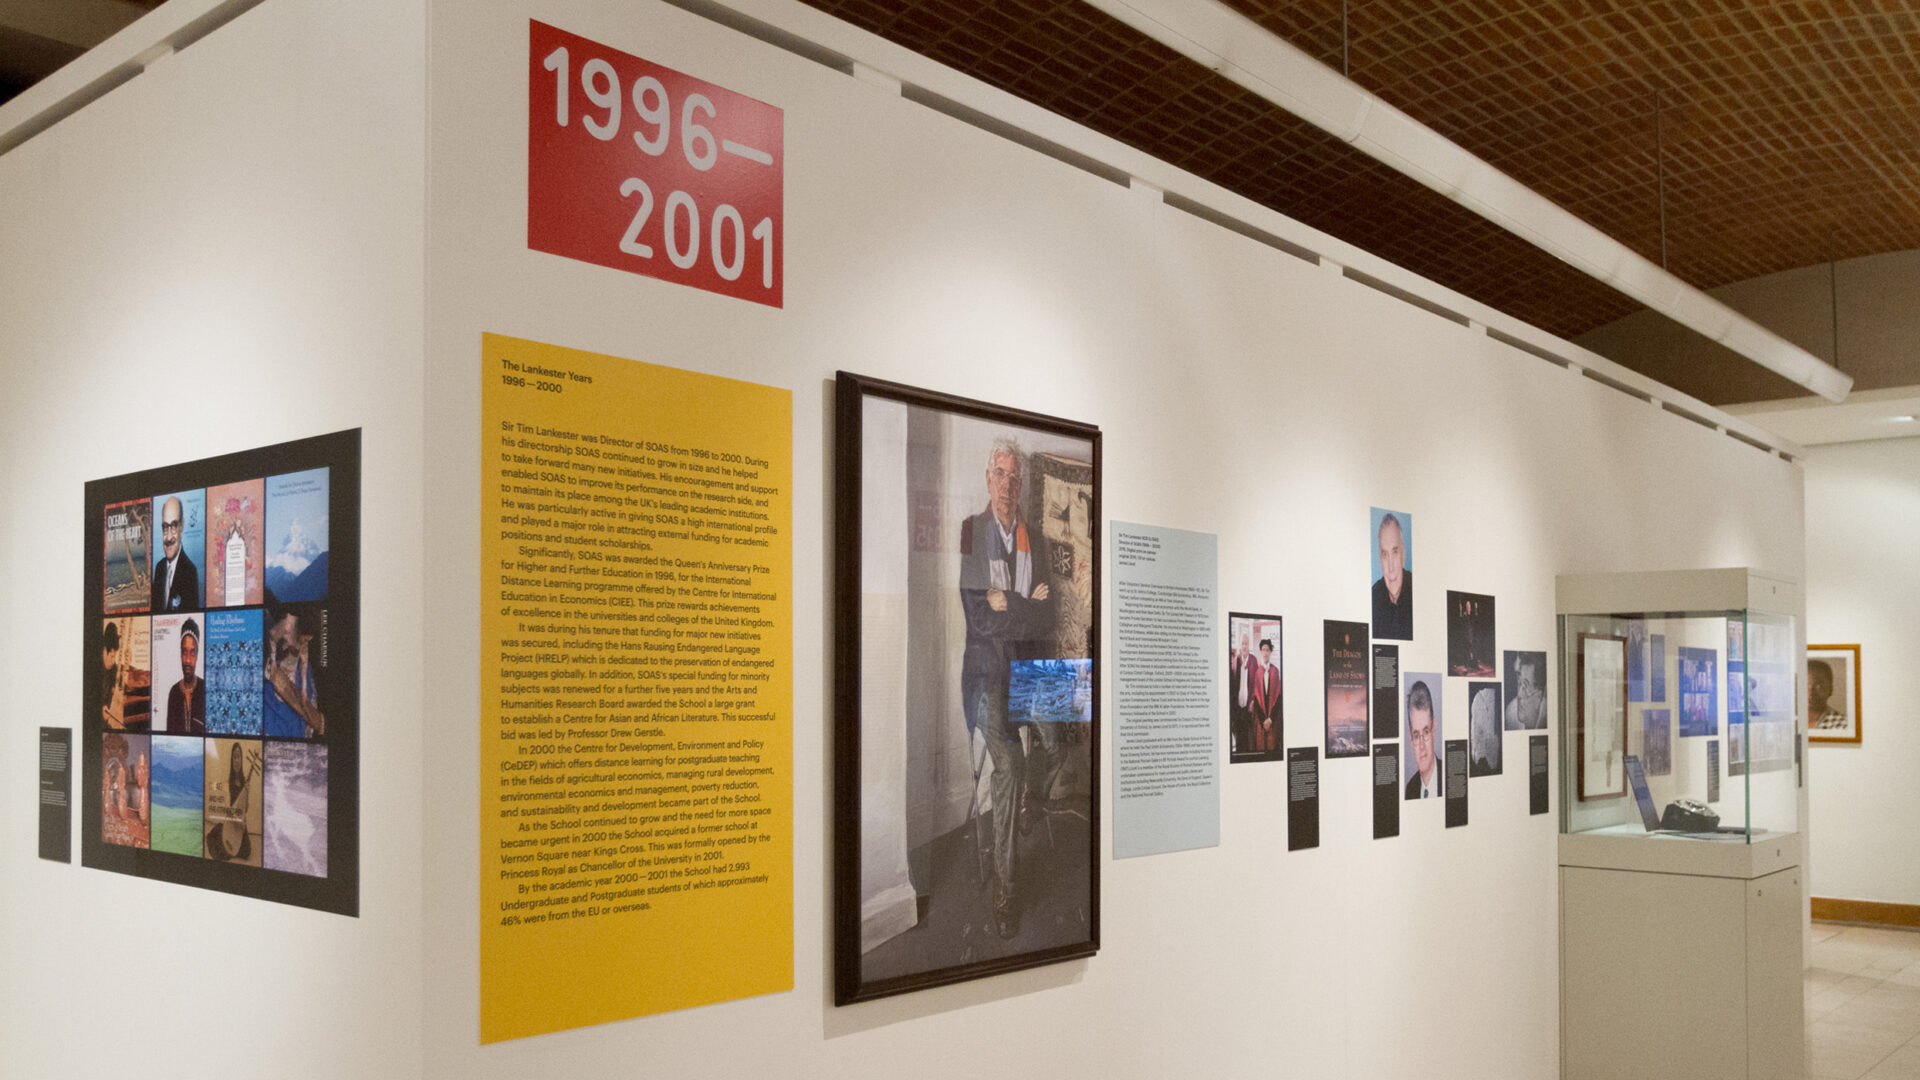 100 years of SOAS University, London exhibition at the Brunei Gallery